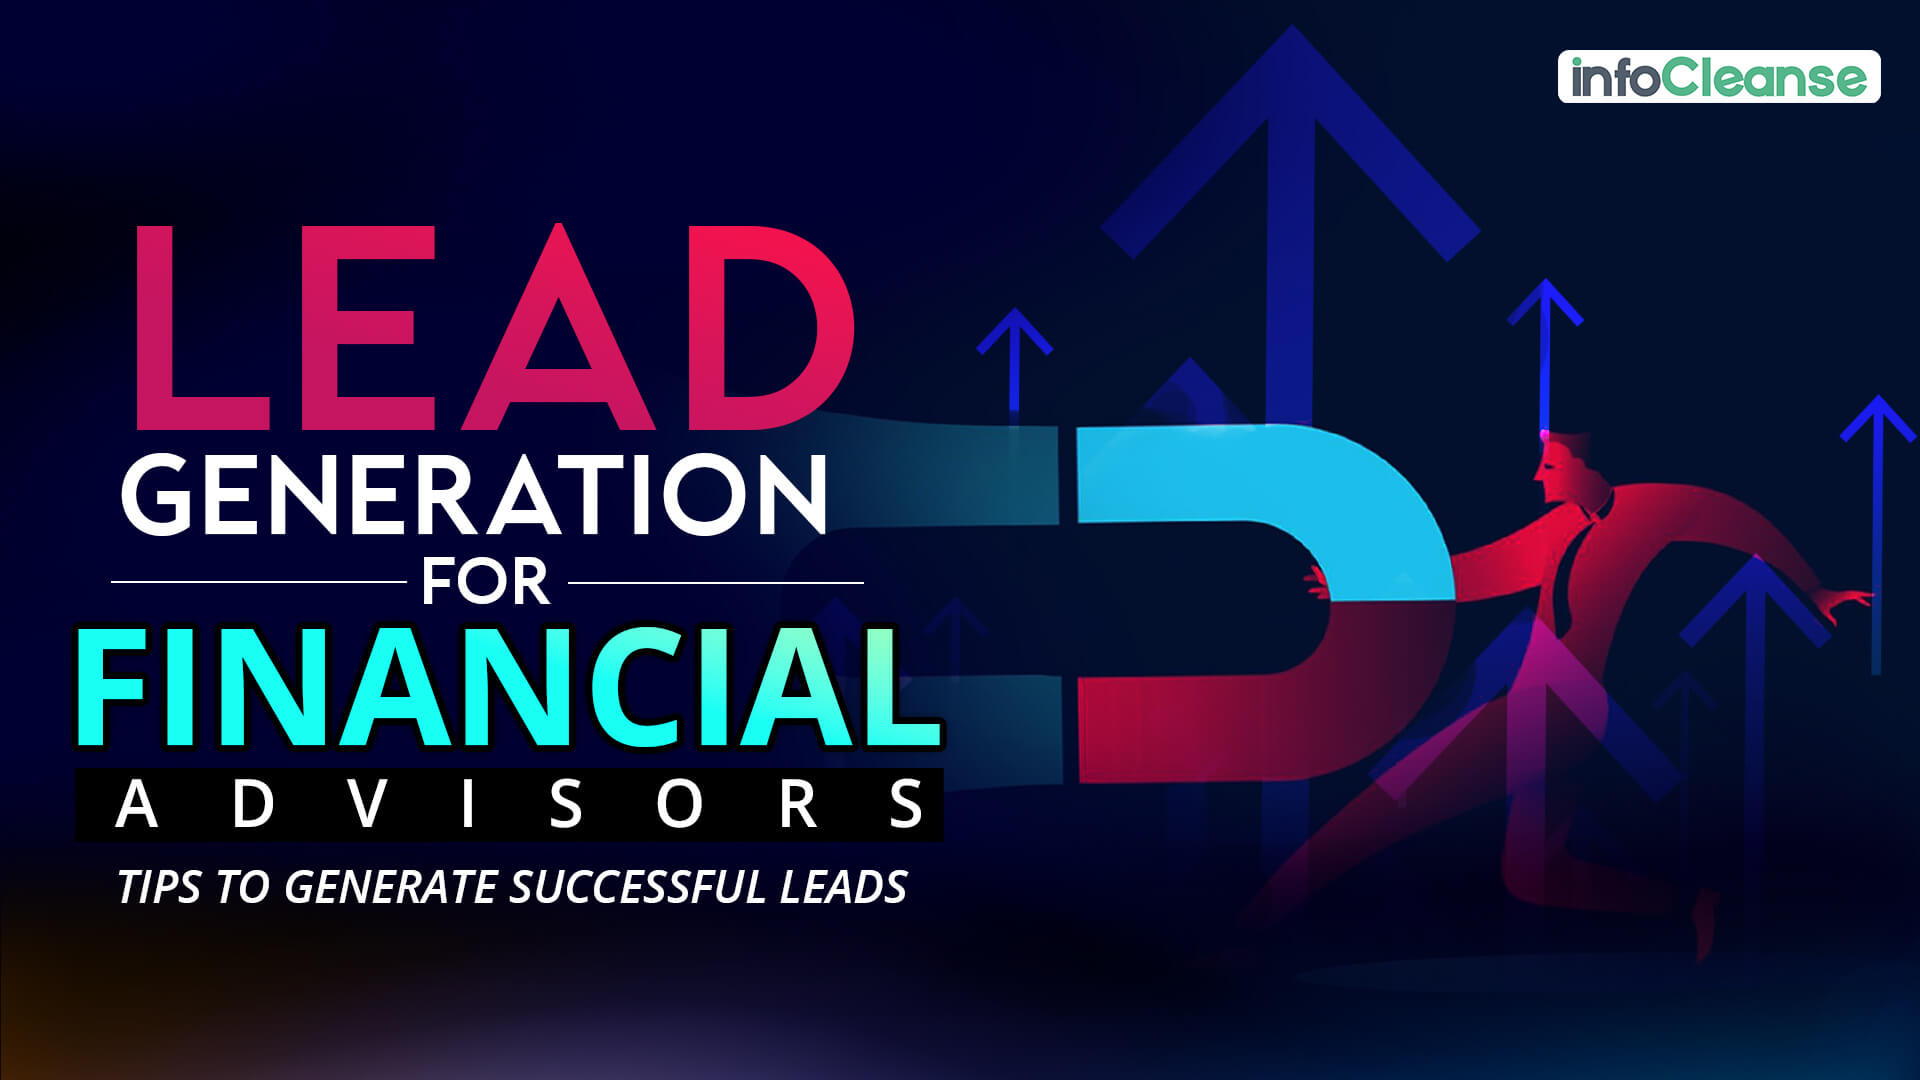 Lead Generation for Financial Advisors: Tips to Generate Successful Leads